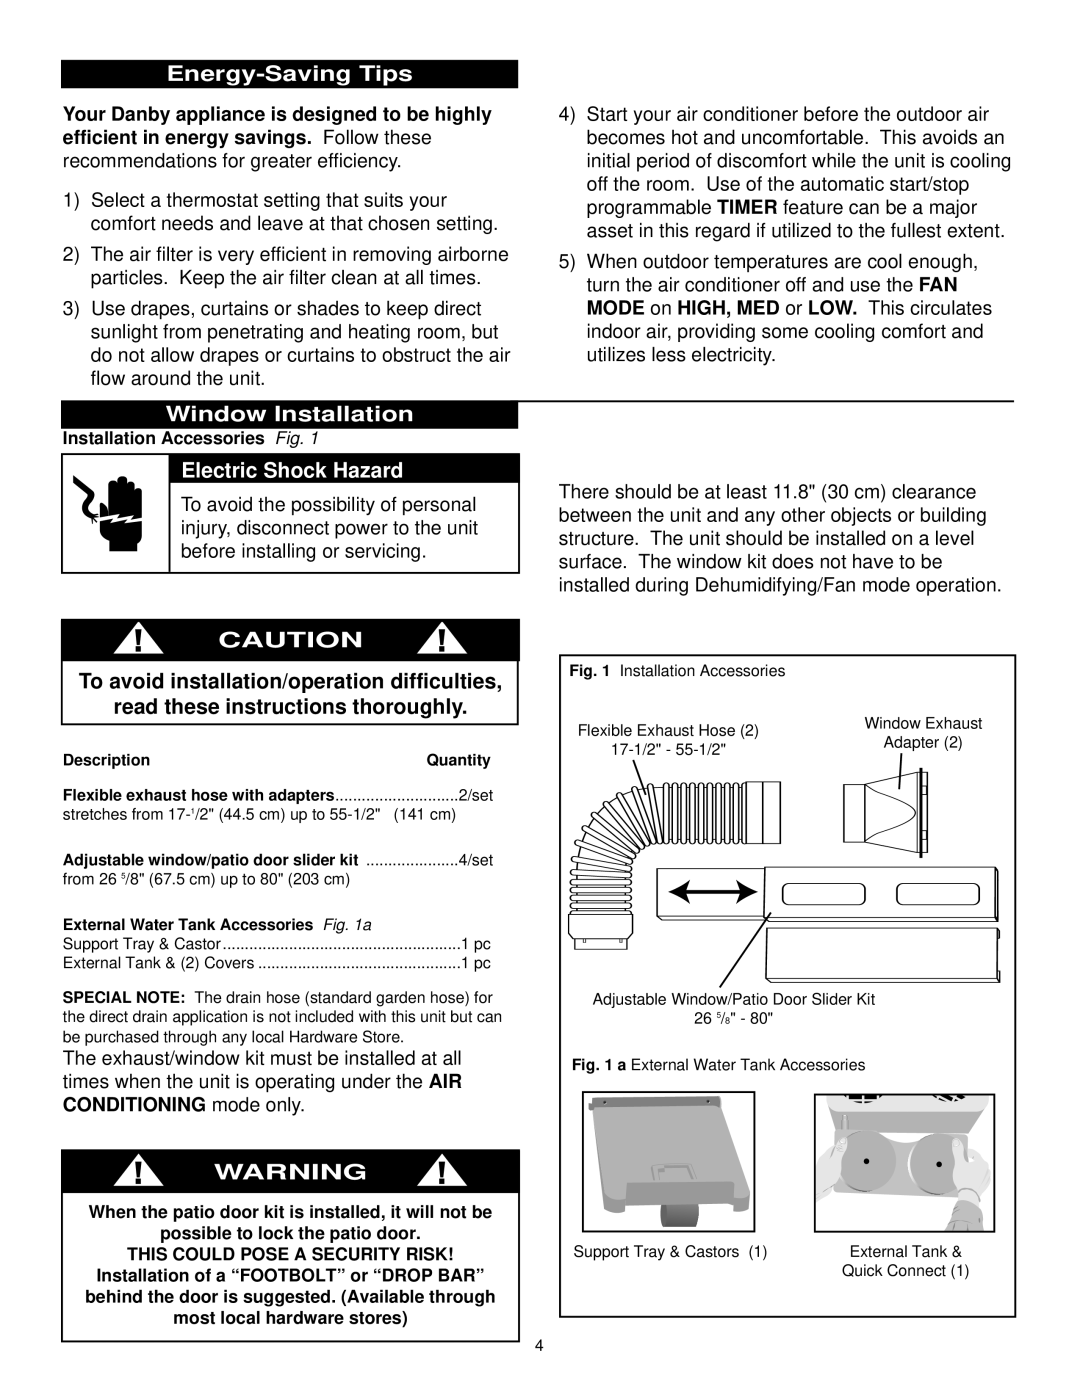 Danby DCAP 12030 manual Energy-SavingTips, Window Installation, Electric Shock Hazard, read these instructions thoroughly 